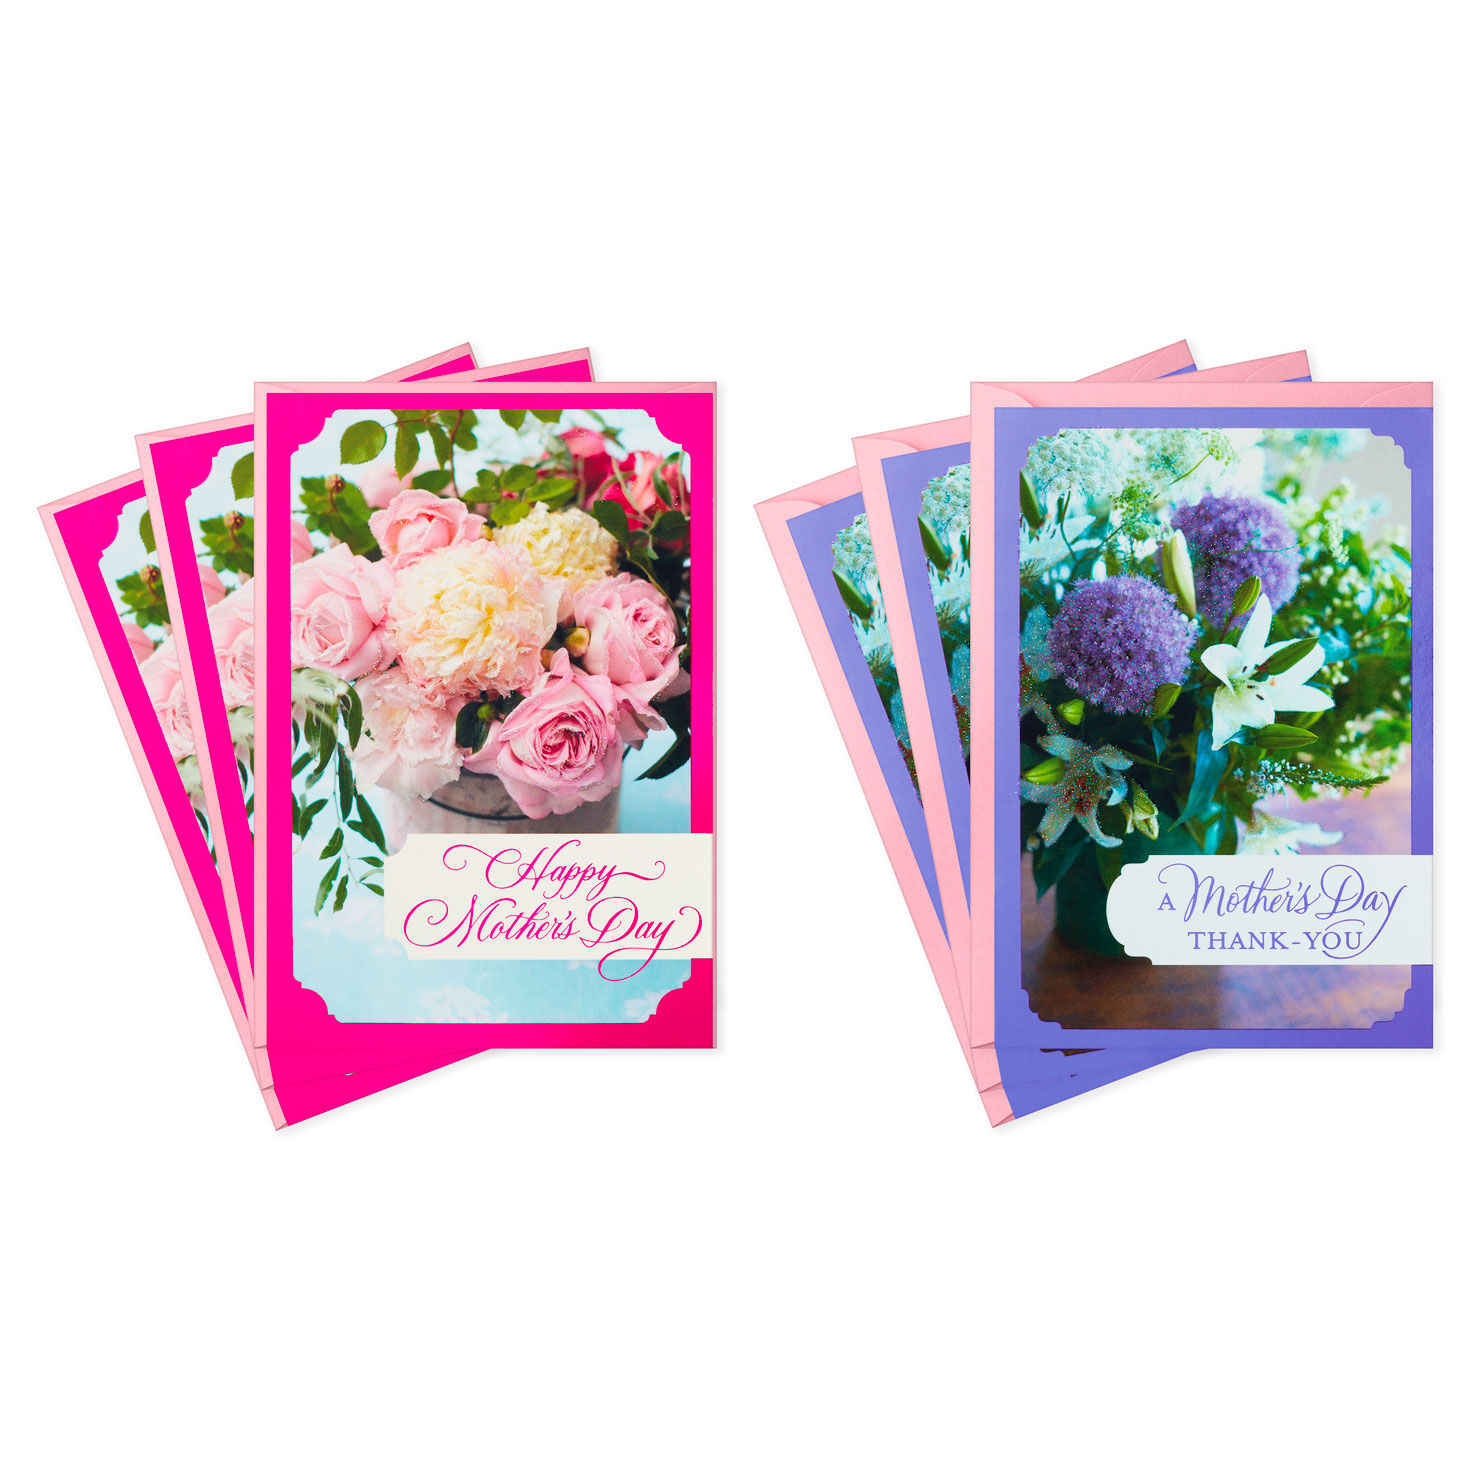 RECIPE CARDS HALLMARK 36 CARDS PER PACK NEW FACTORY SEALED 4” by 6” FLORAL 